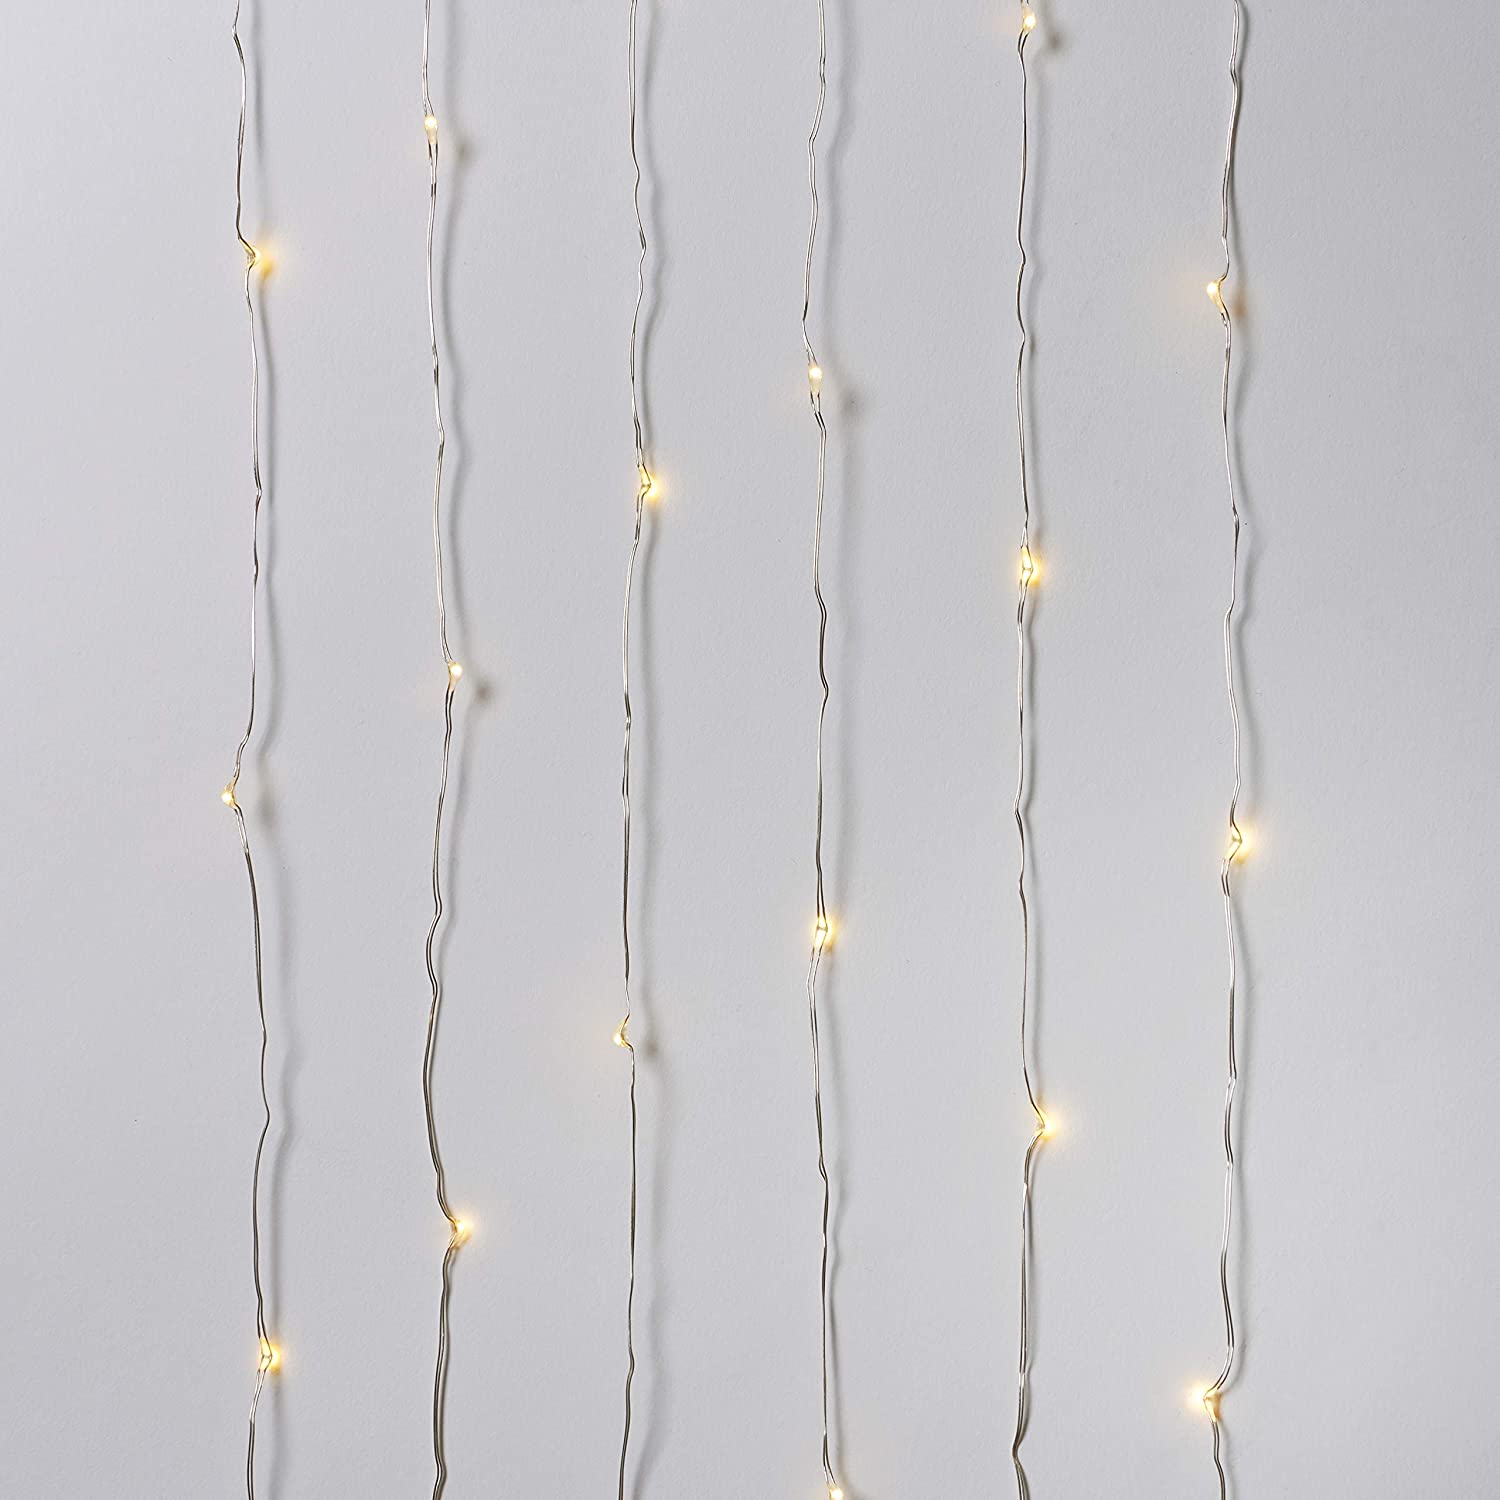 32ft Battery-Powered LED String Lights with 100 LED Lights